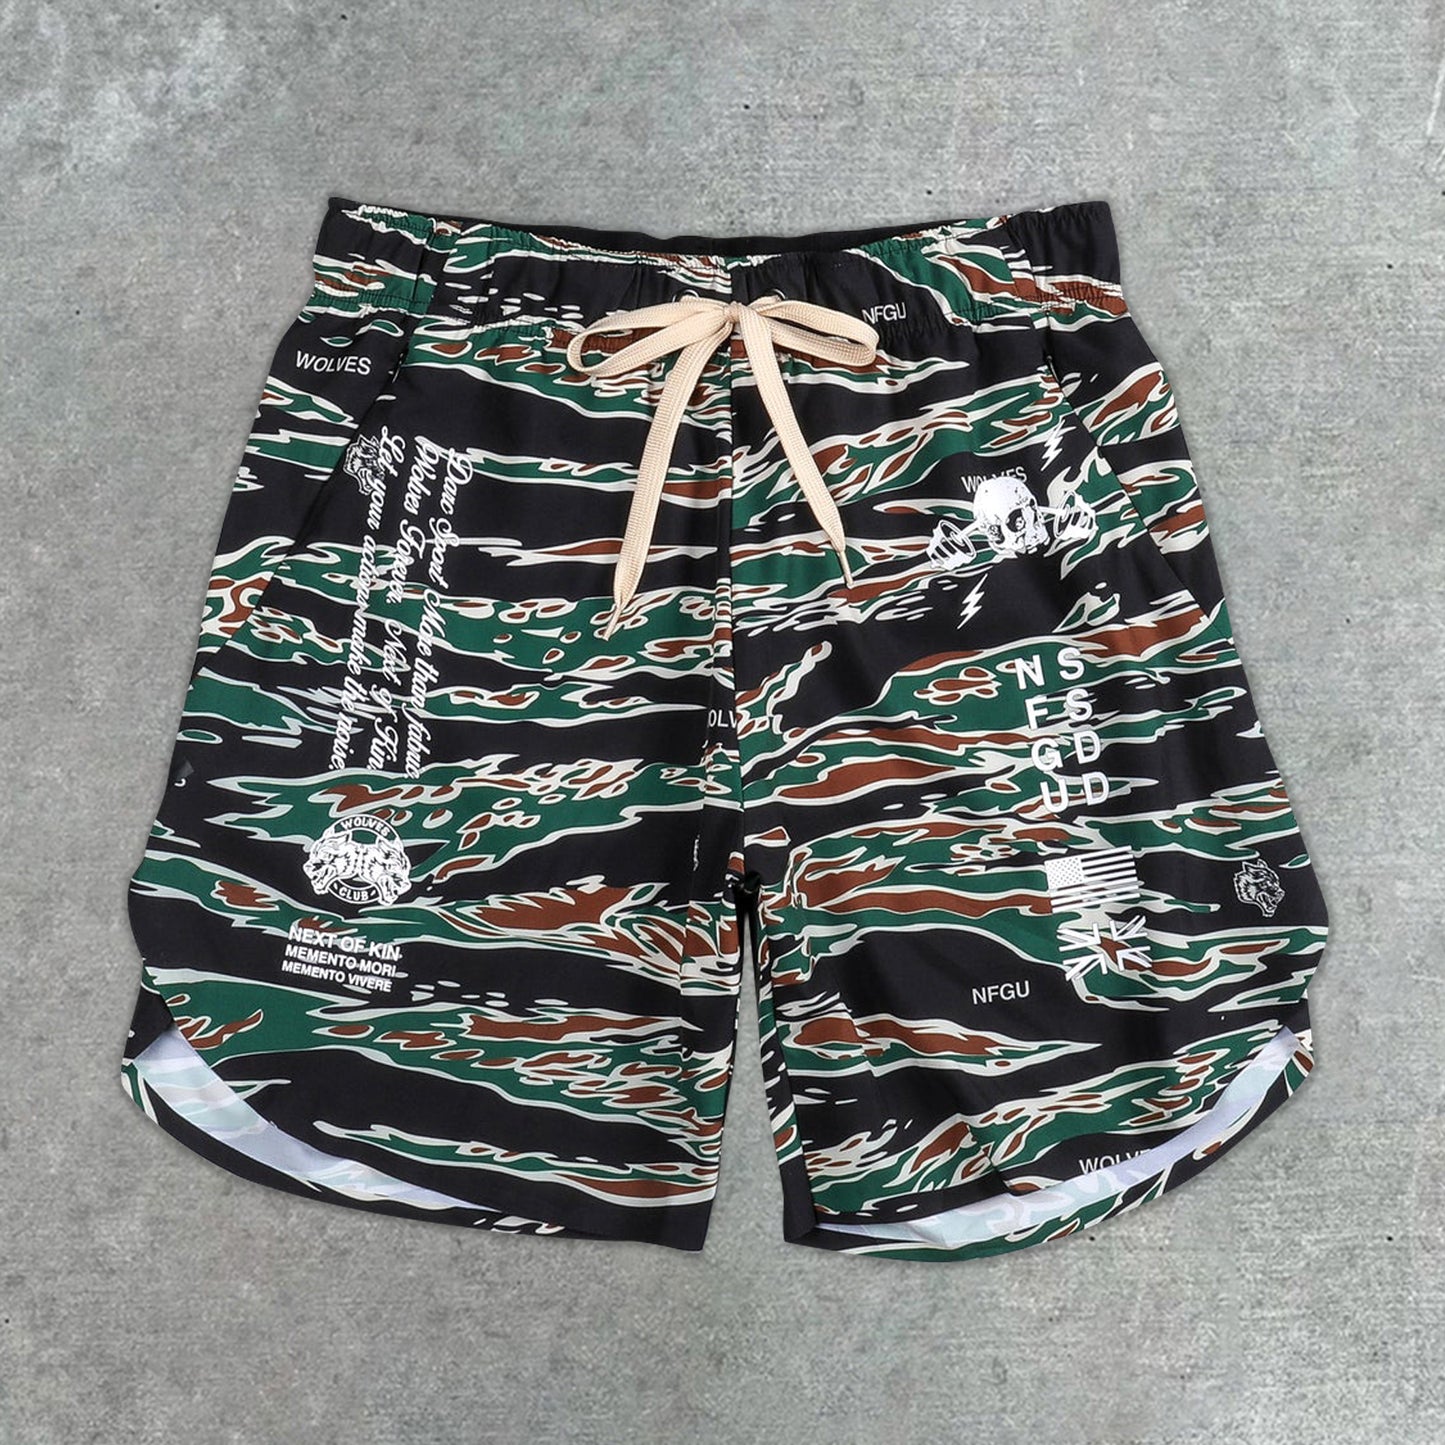 Fashion sports style fitness casual camouflage shorts